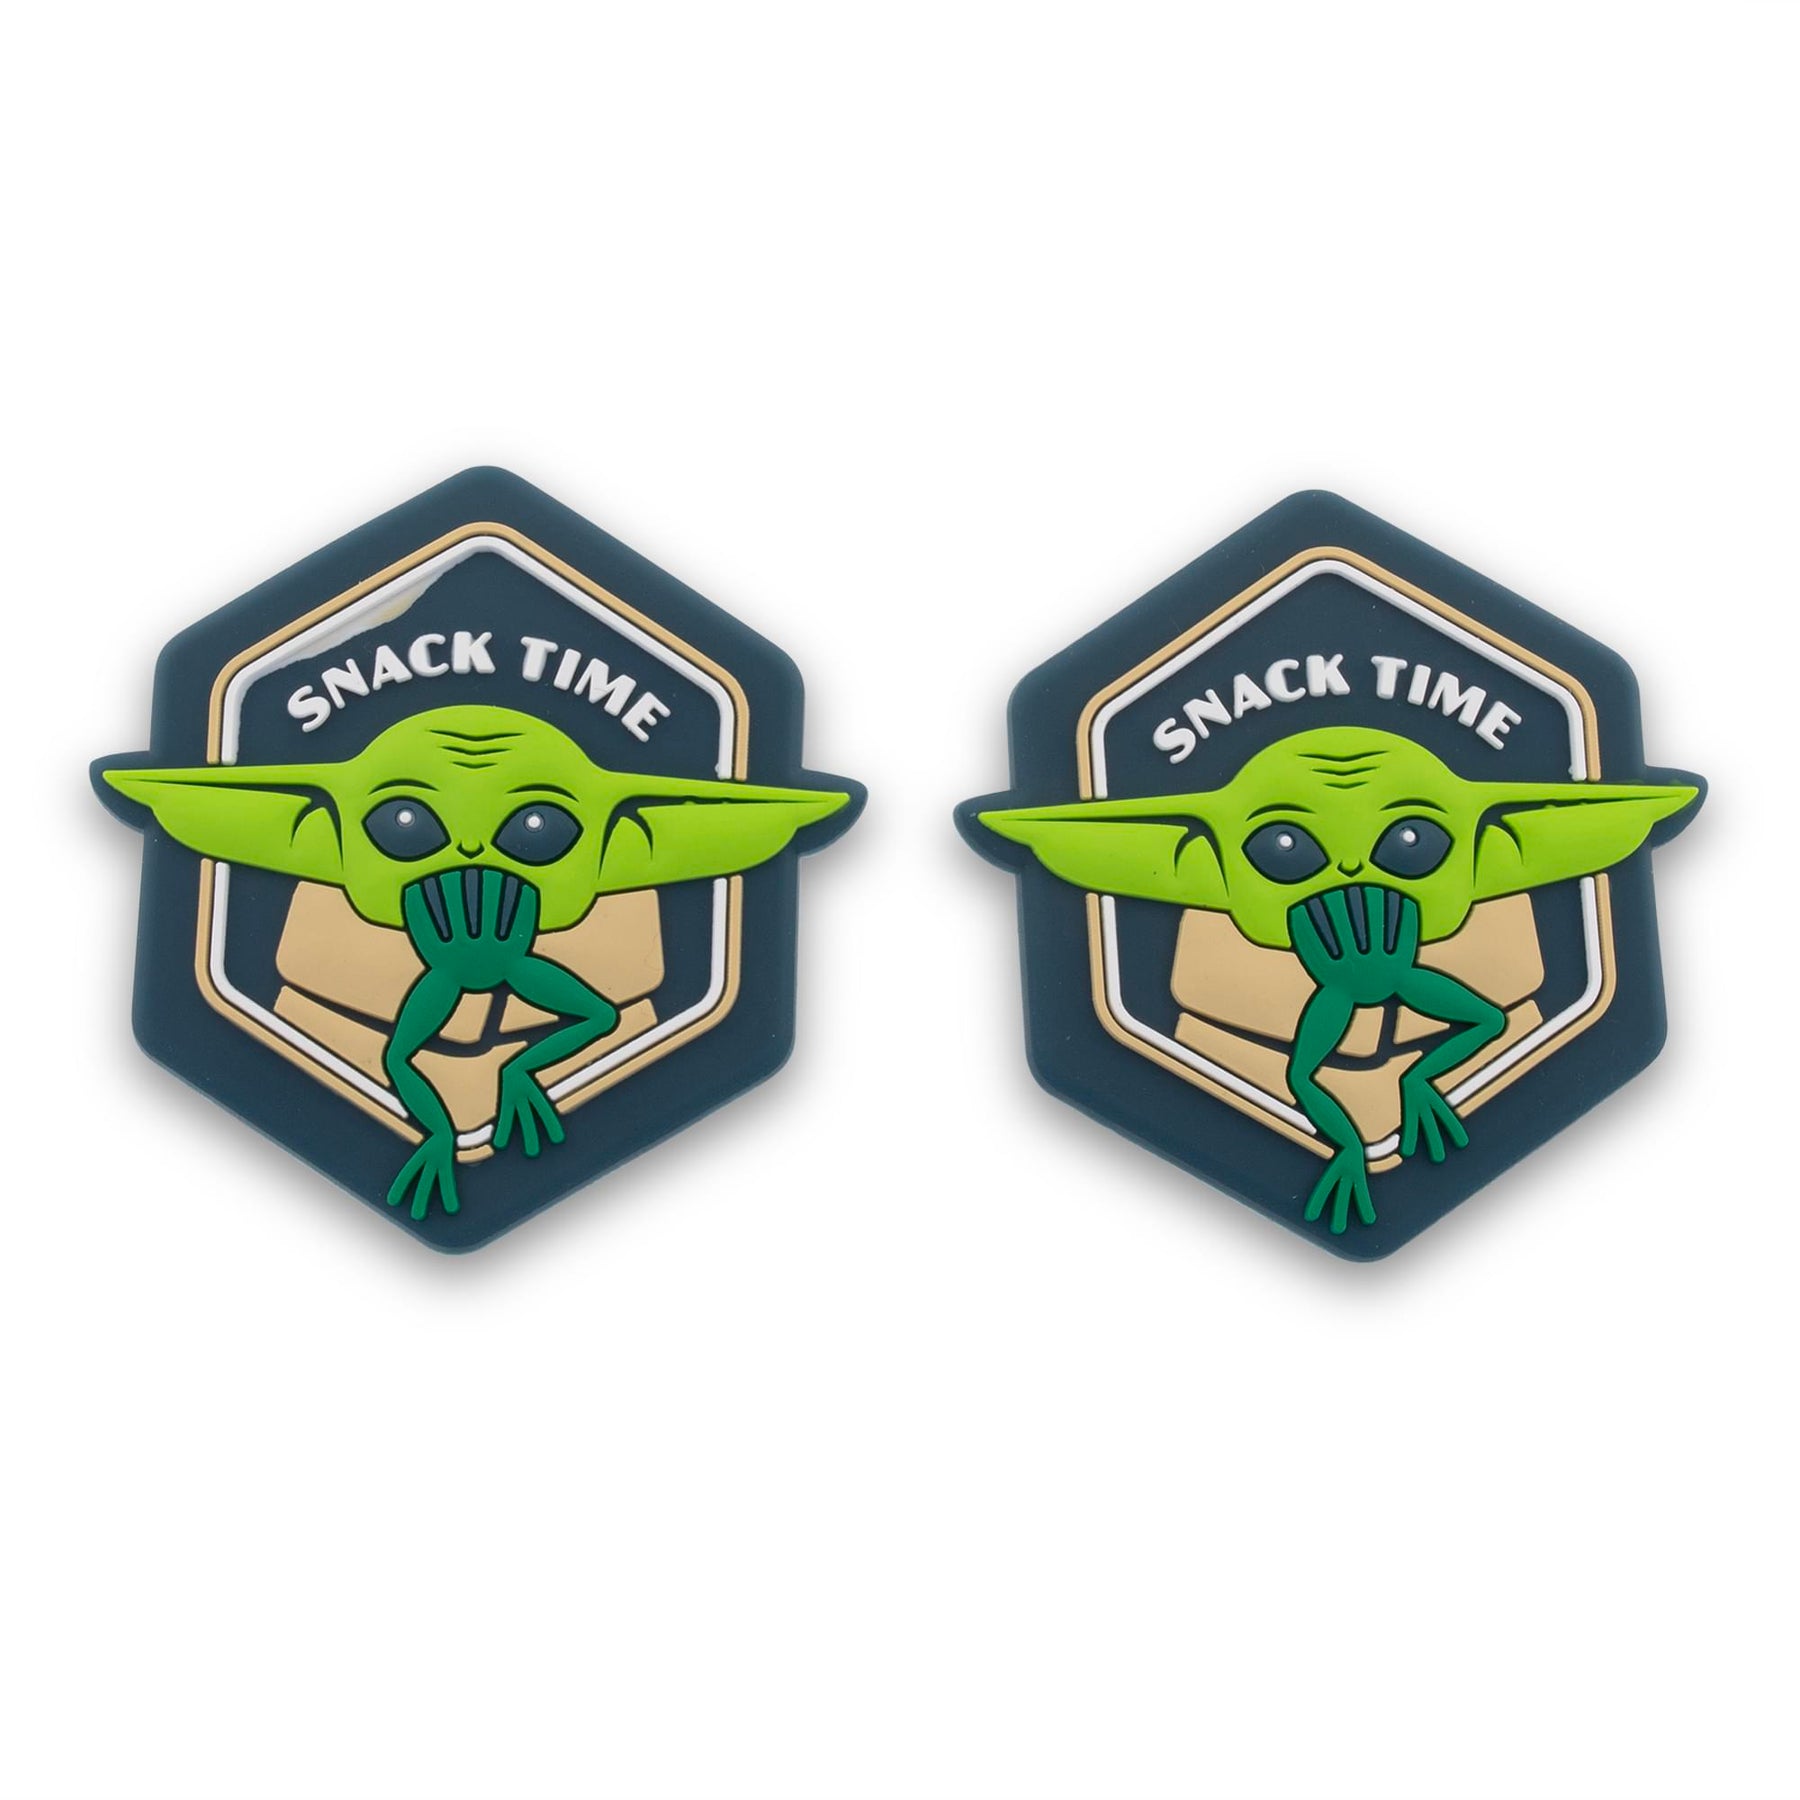 Star Wars: The Mandalorian Grogu The Child Snack Time Chip Clips | Set of 2